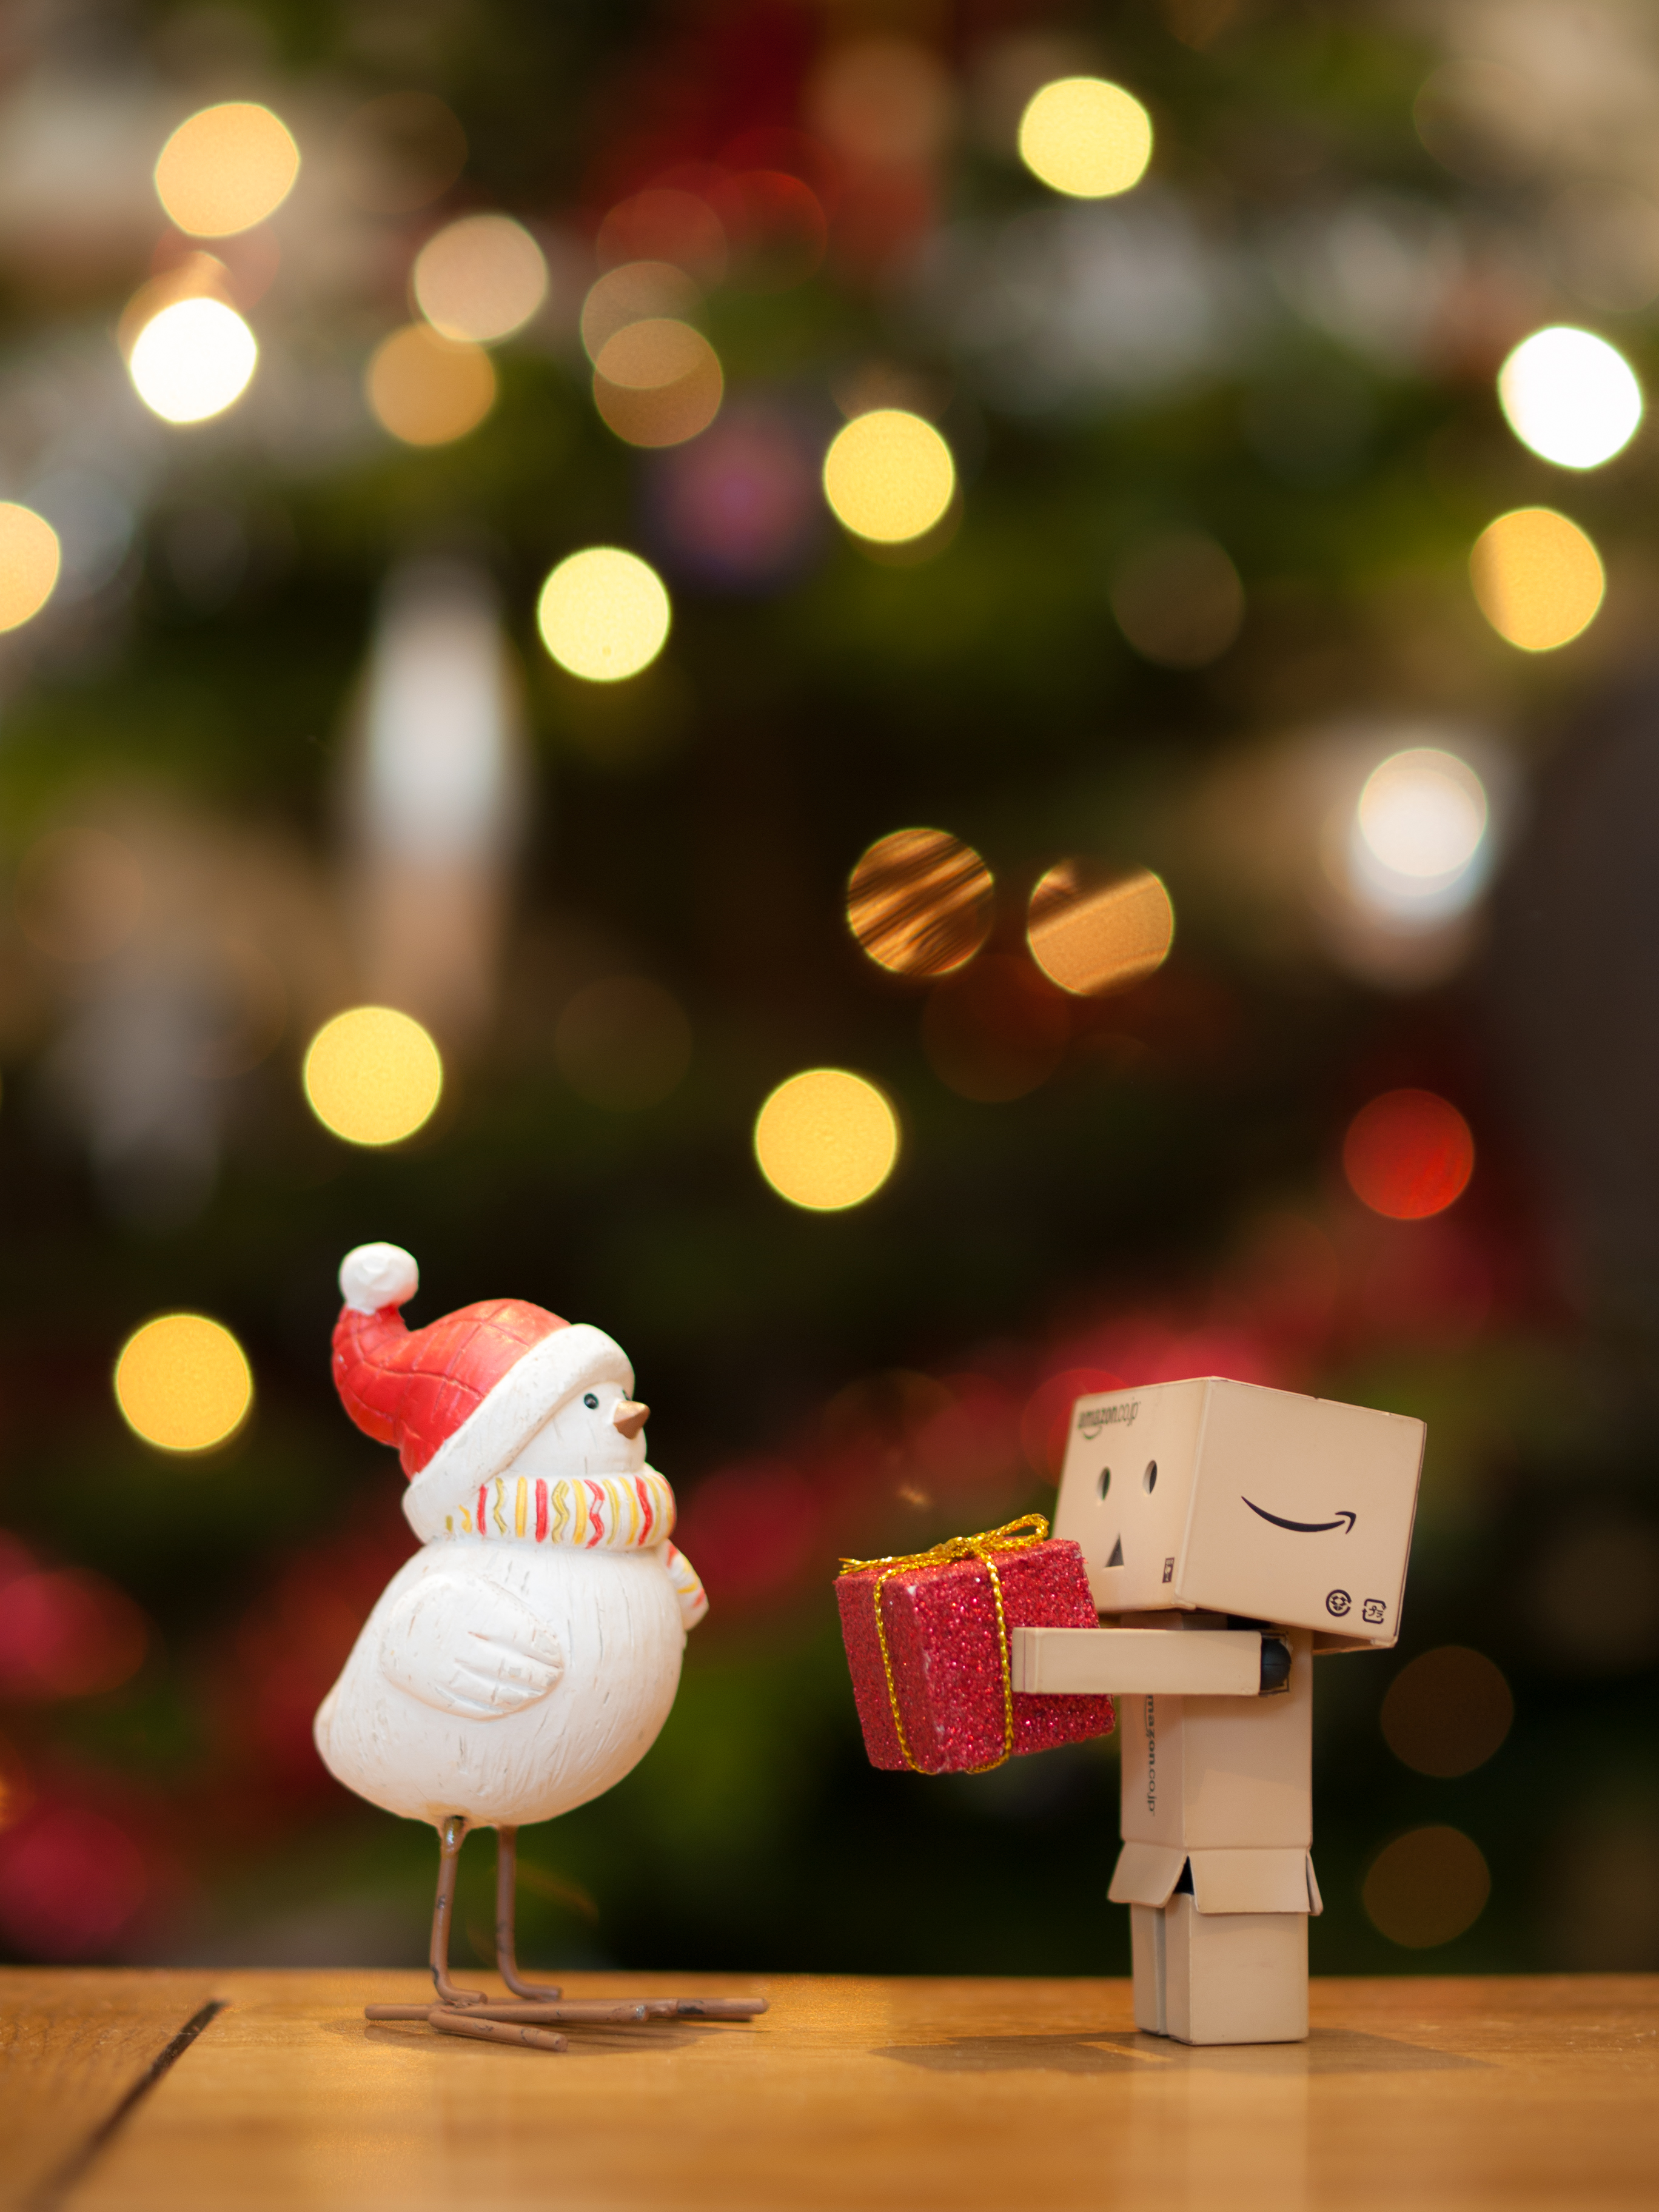 111682 Screensavers and Wallpapers Present for phone. Download miscellanea, miscellaneous, christmas, present, gift, danbo, cardboard robot, chick, chicken pictures for free